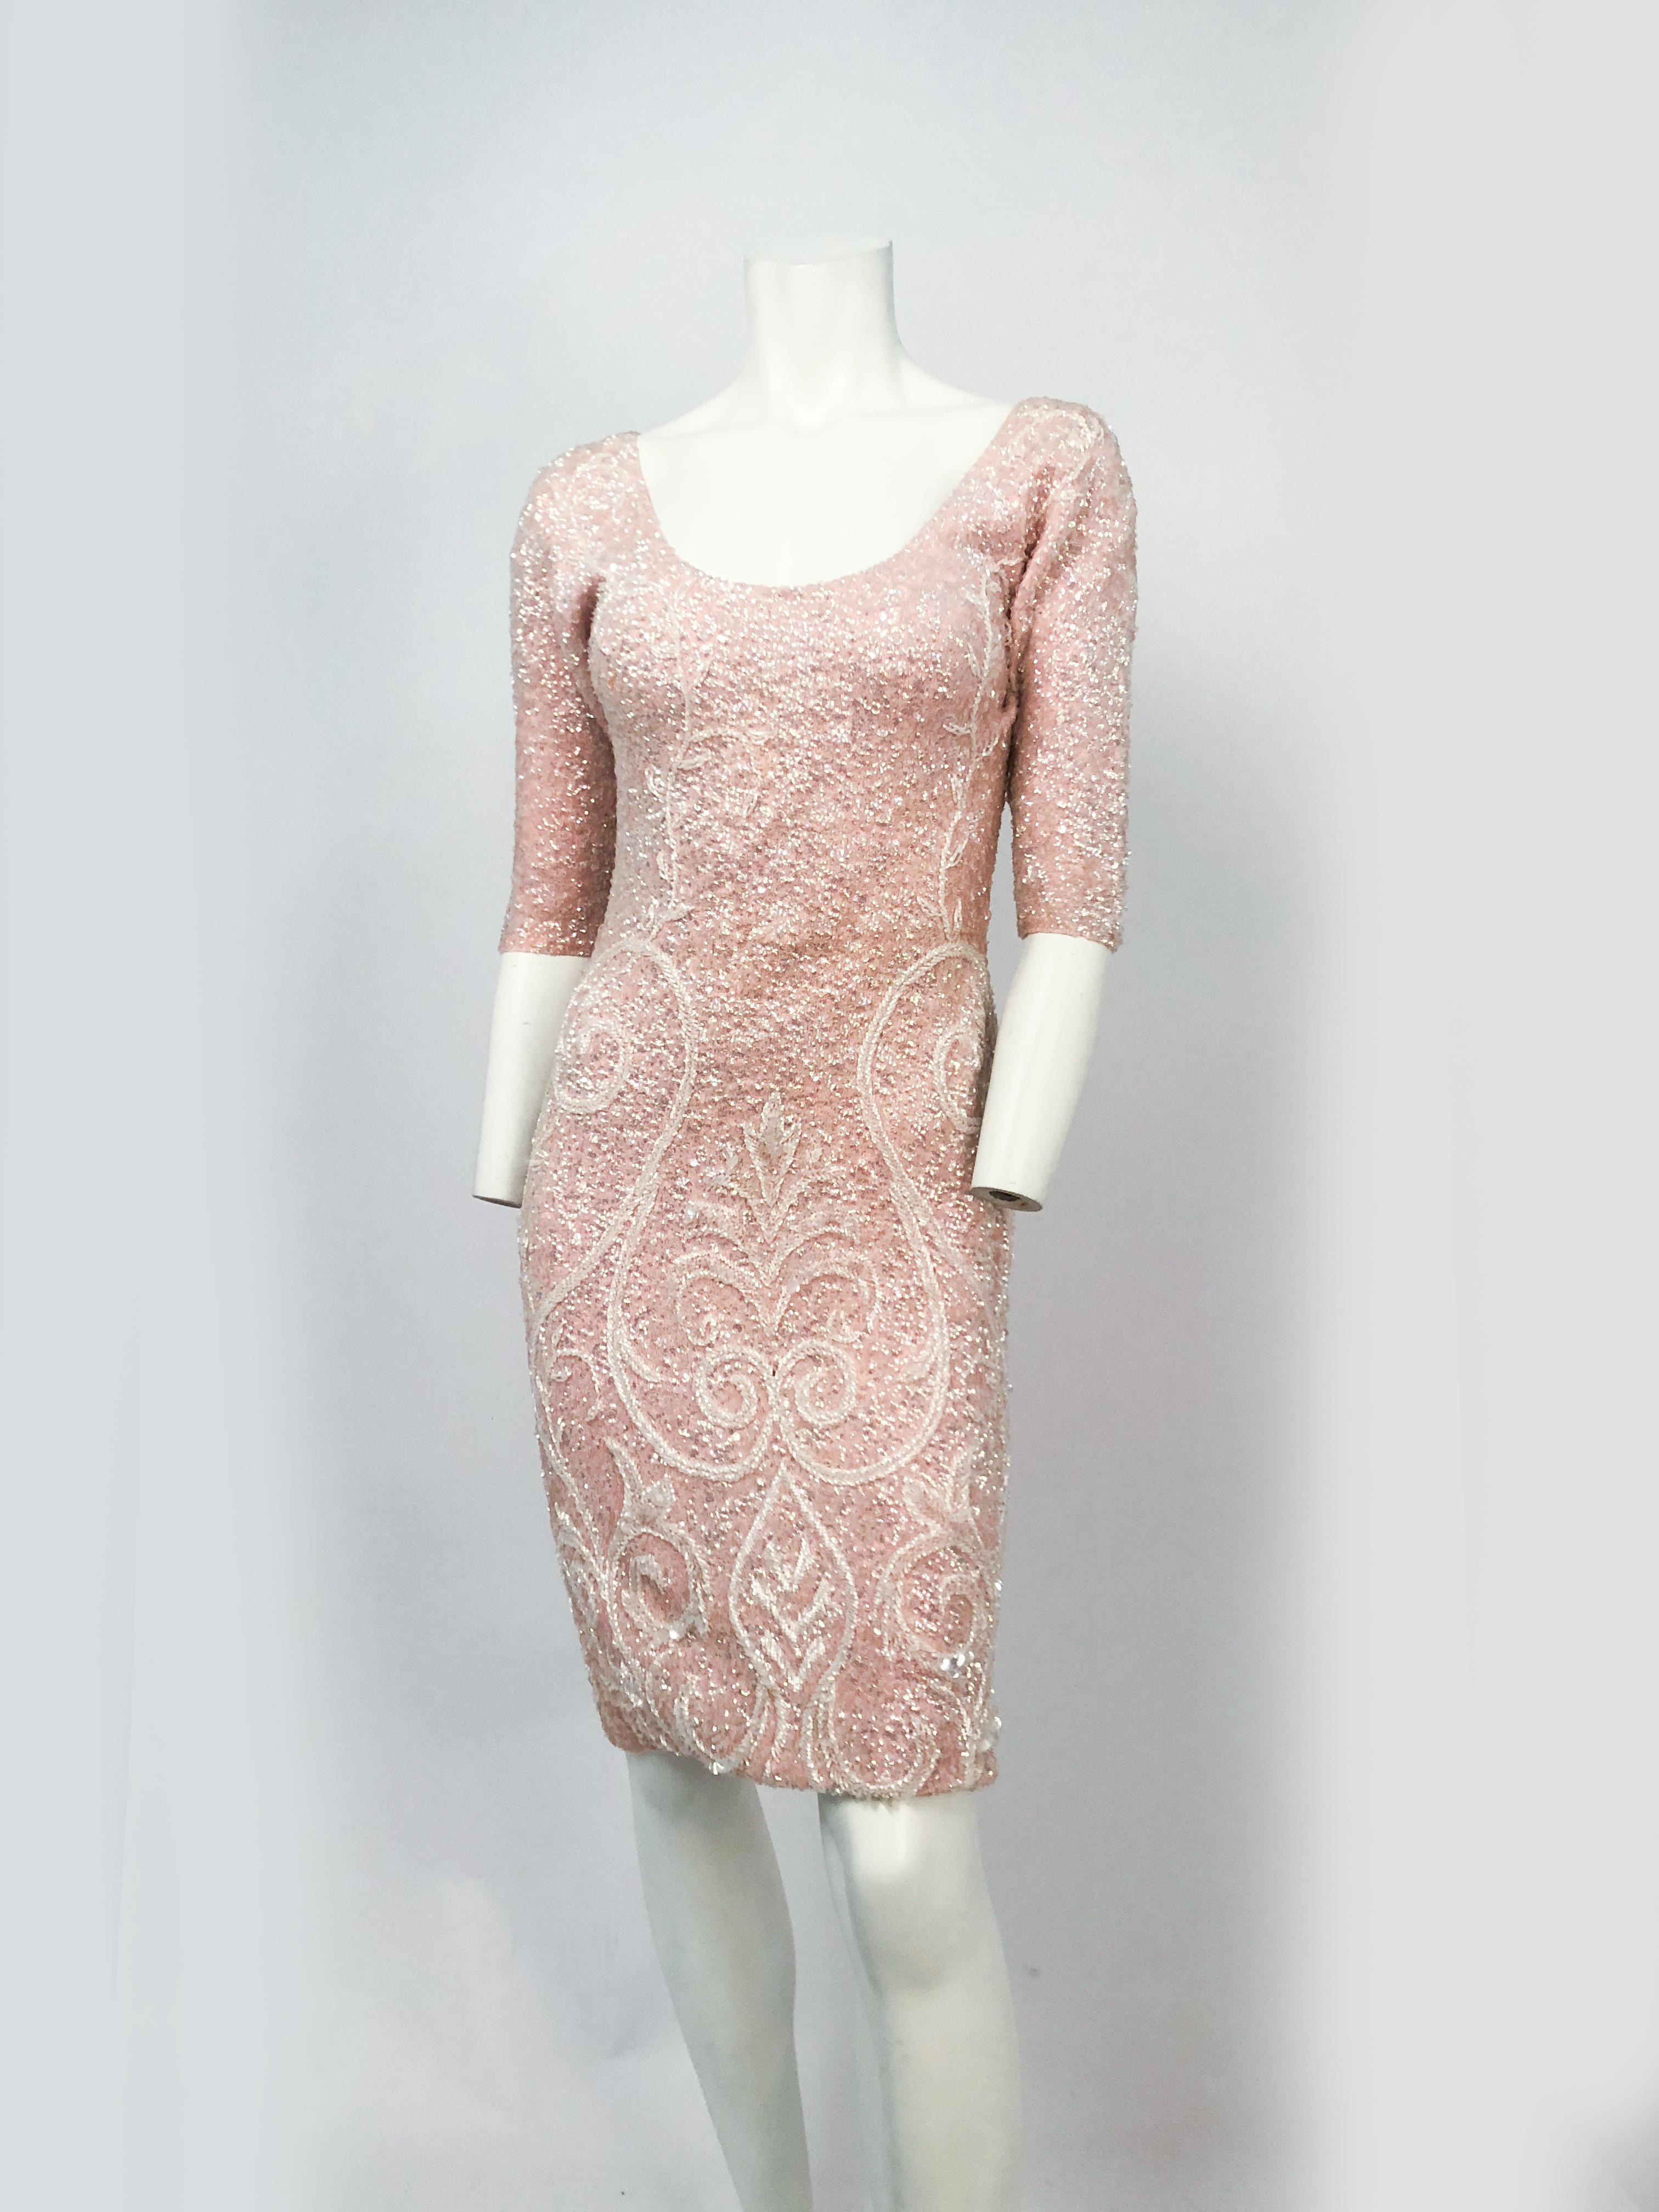 1960s Bink Sequin and Beaded Knit Dress. Features hand white beading and iridescent sequin, elbow length sleeves, and a scoop neck.